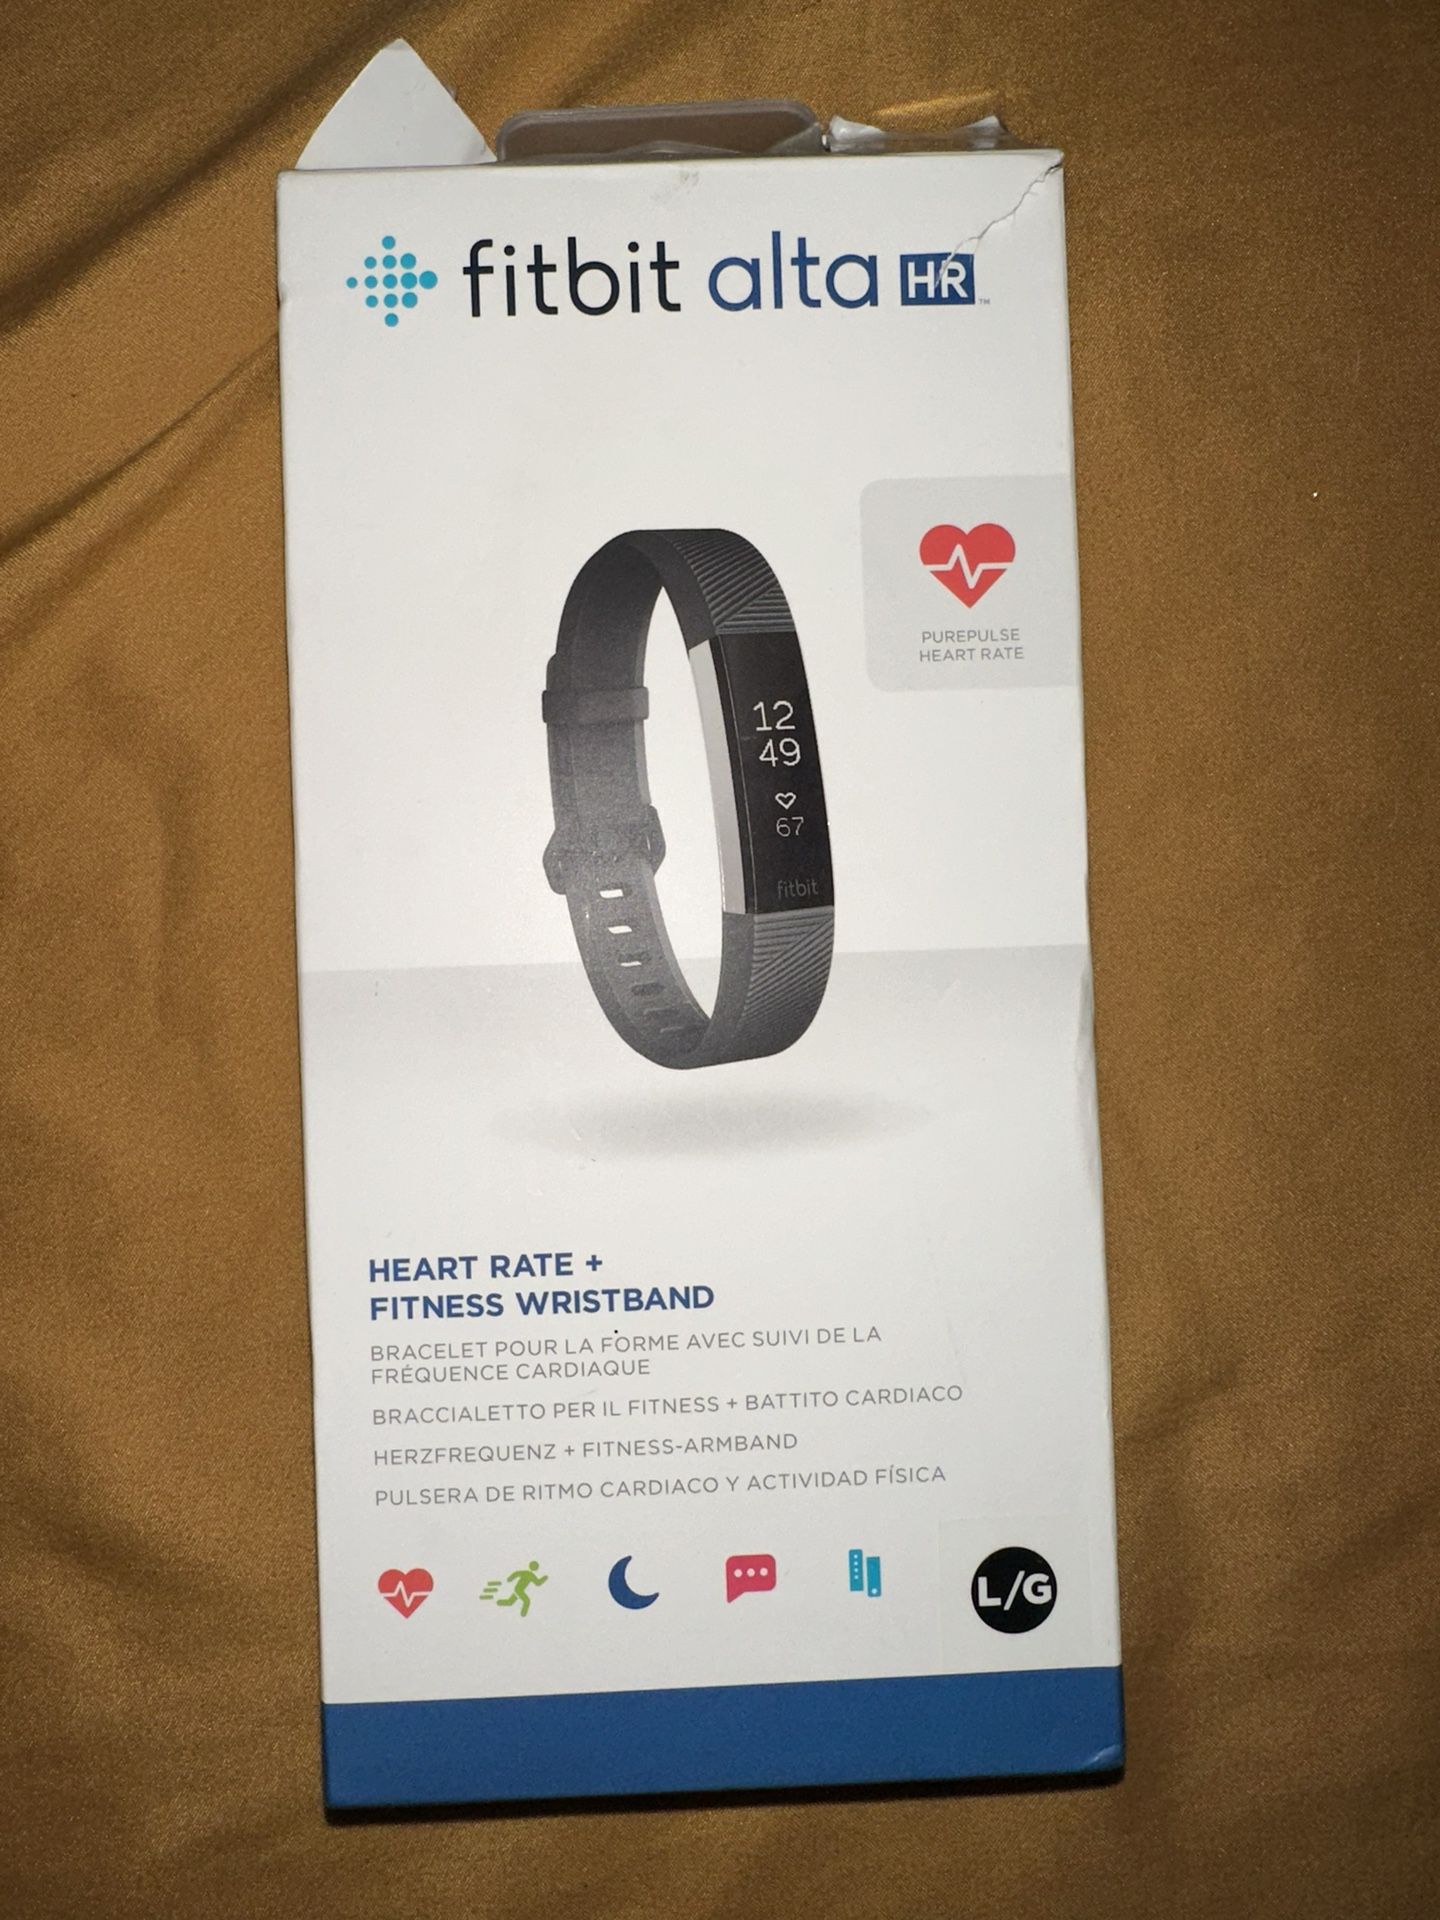 Fitbit Alta HR and Garmin 230 Forerunner Watches For Sale